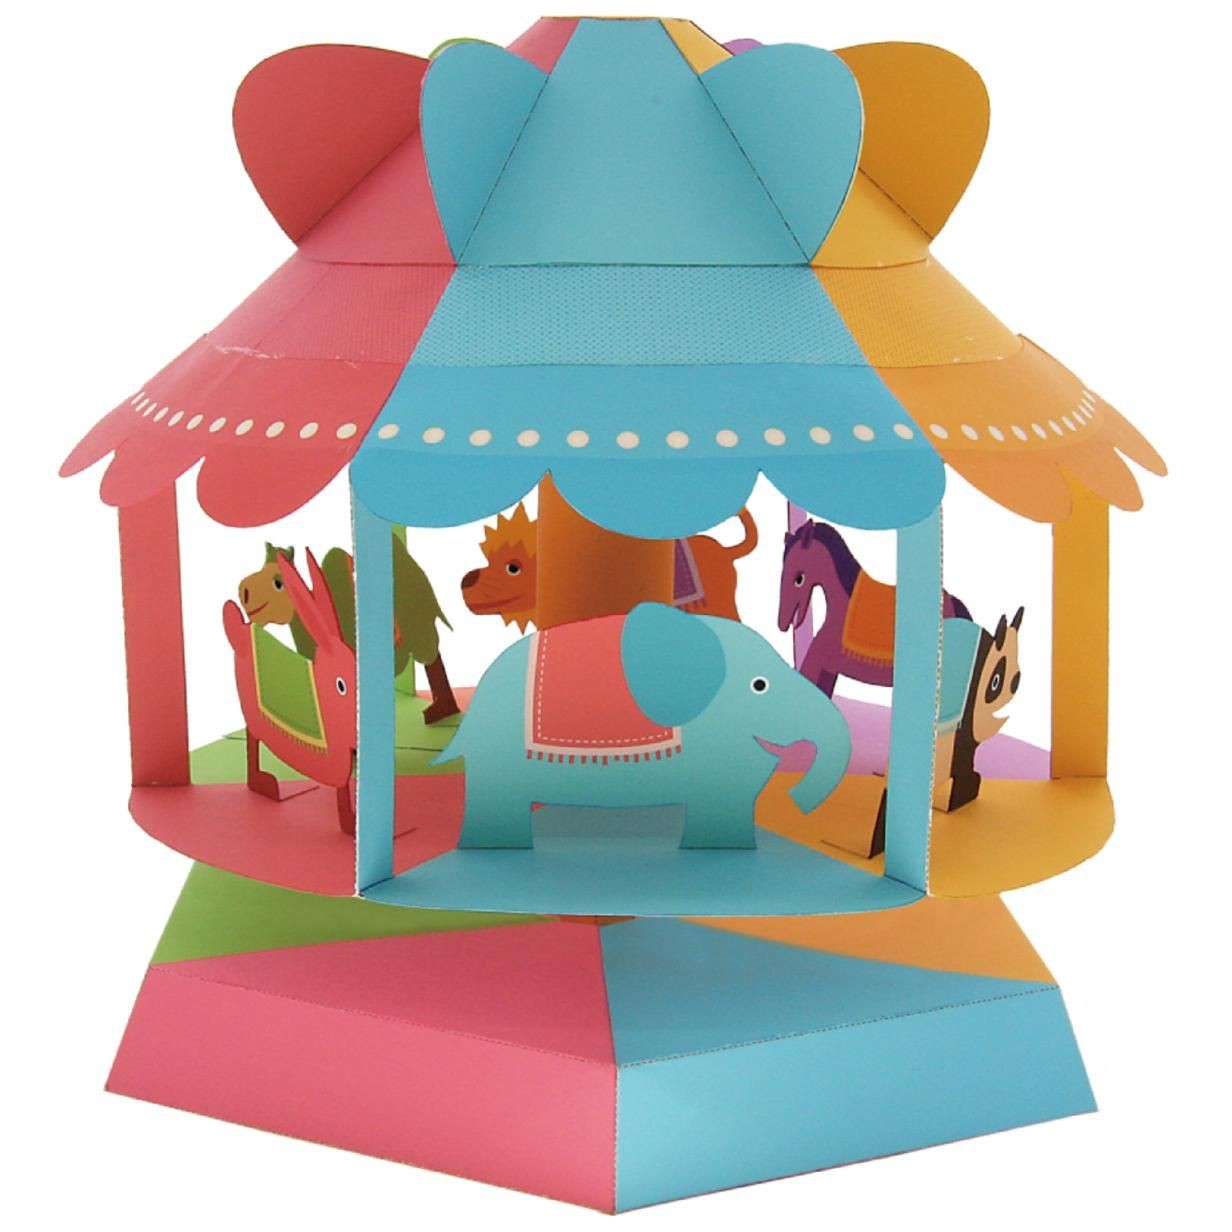 Canon Papercraft Wind Powered Merry Go Round toys Paper Craft Educational Rabbit